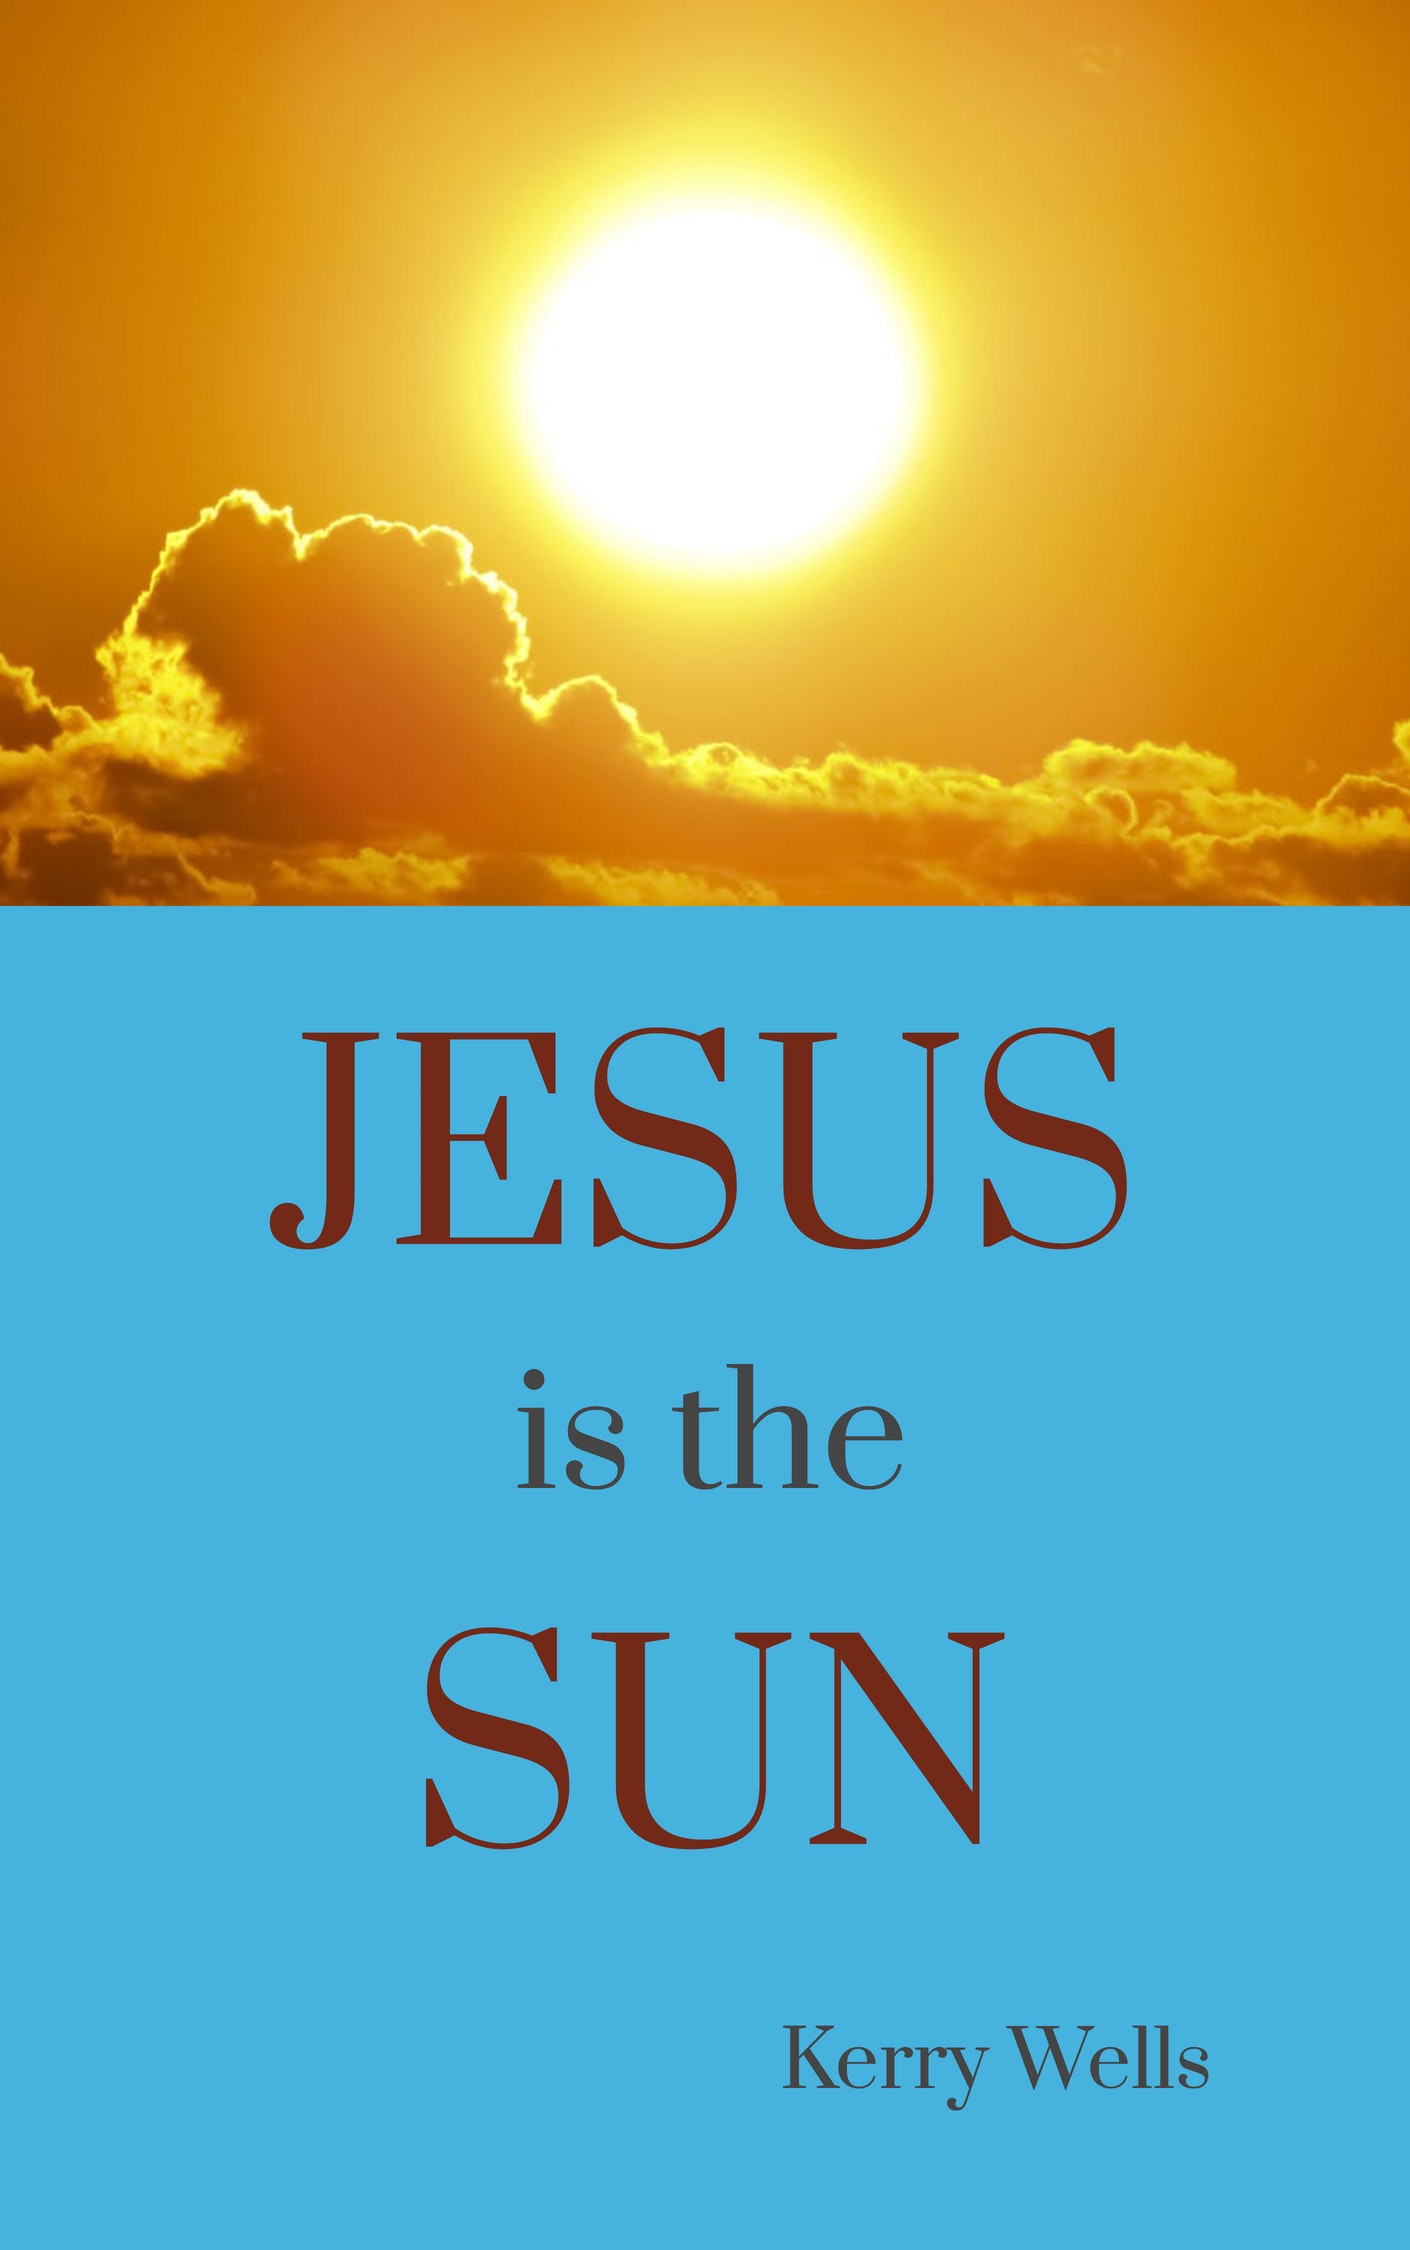 FREE: Jesus is the Sun by Kerry Wells